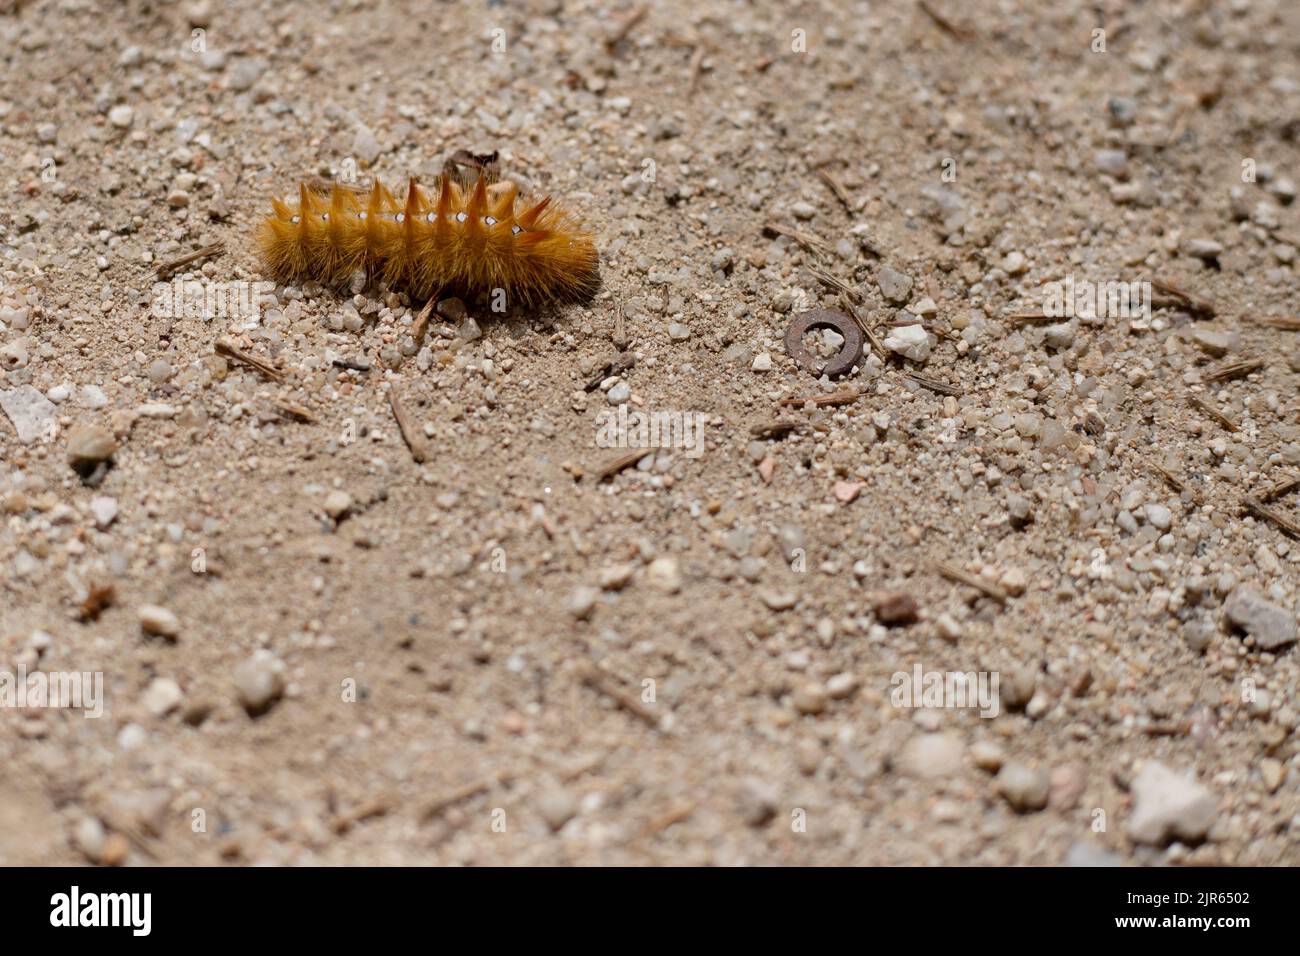 hairy worm walking in the sand Stock Photo